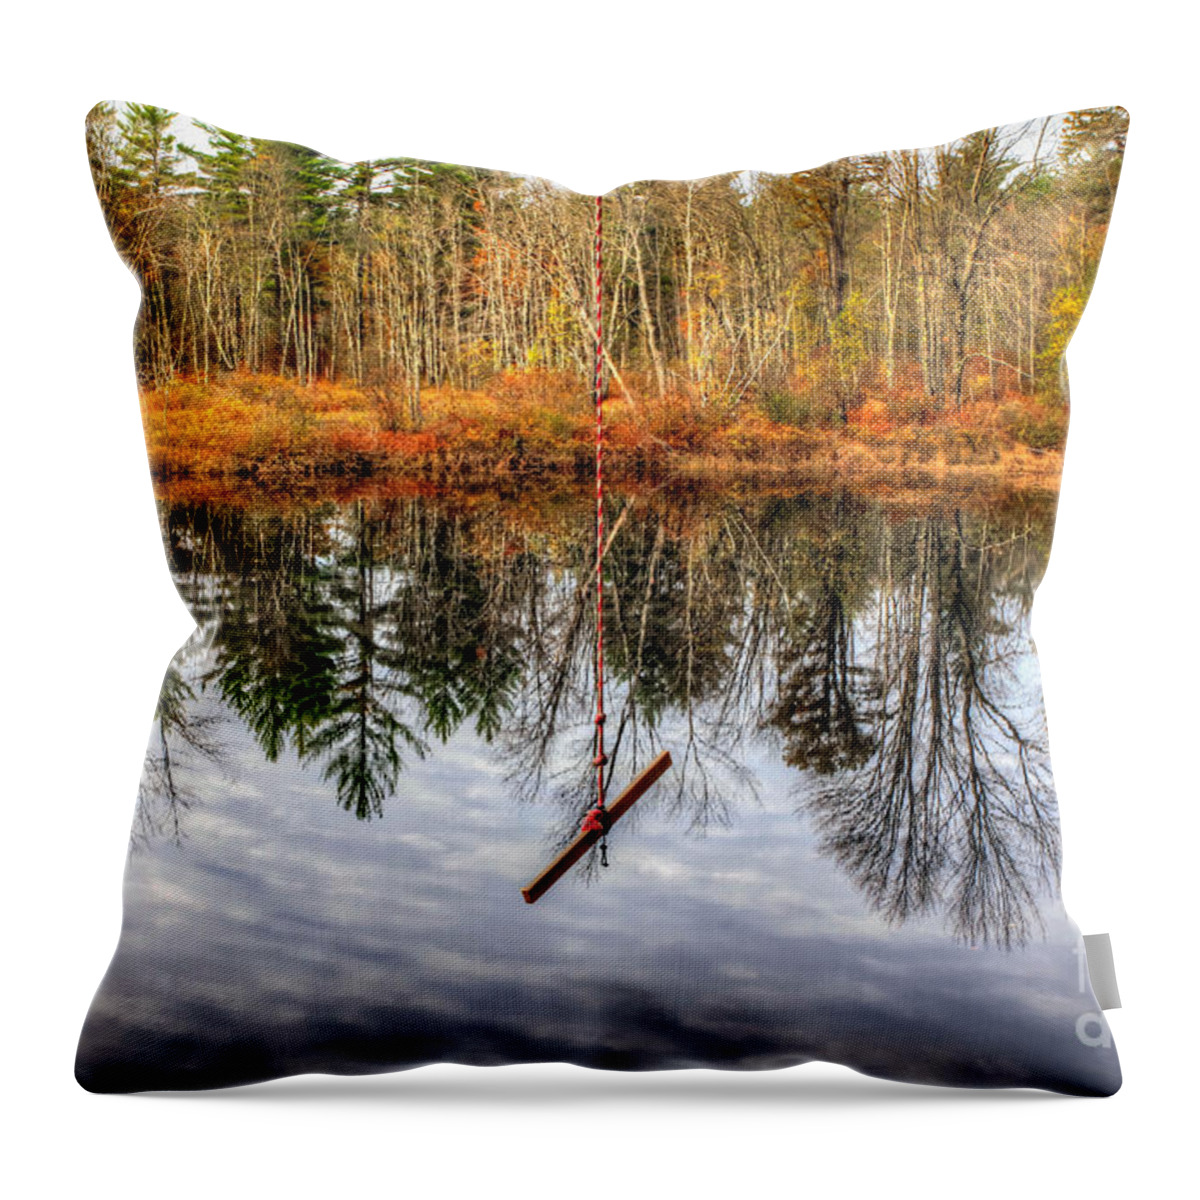 Line Throw Pillow featuring the photograph Drop Line by Brenda Giasson